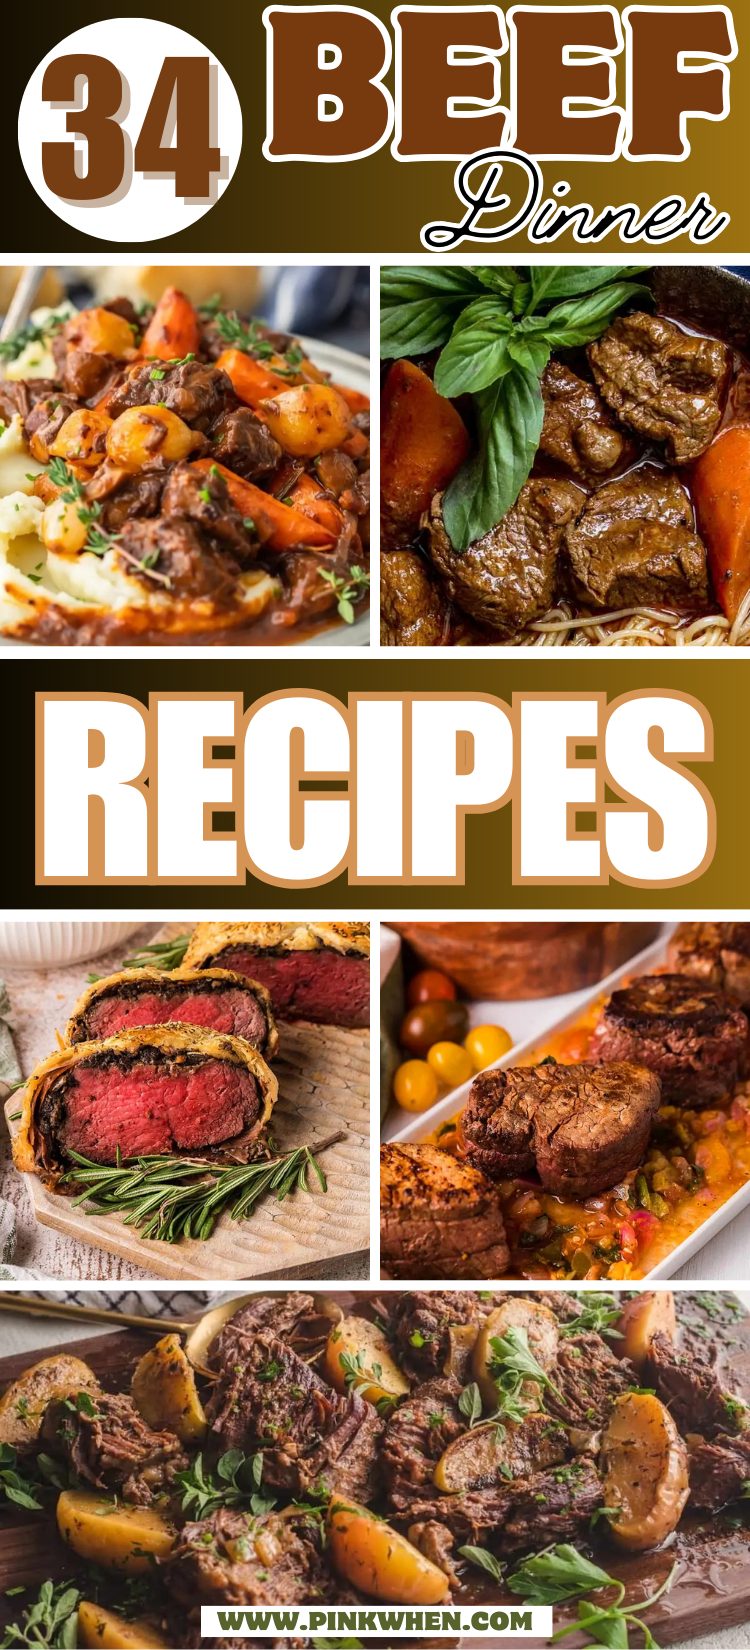 34 Beef Dinner Recipes to Keep You Warm All Winter Long